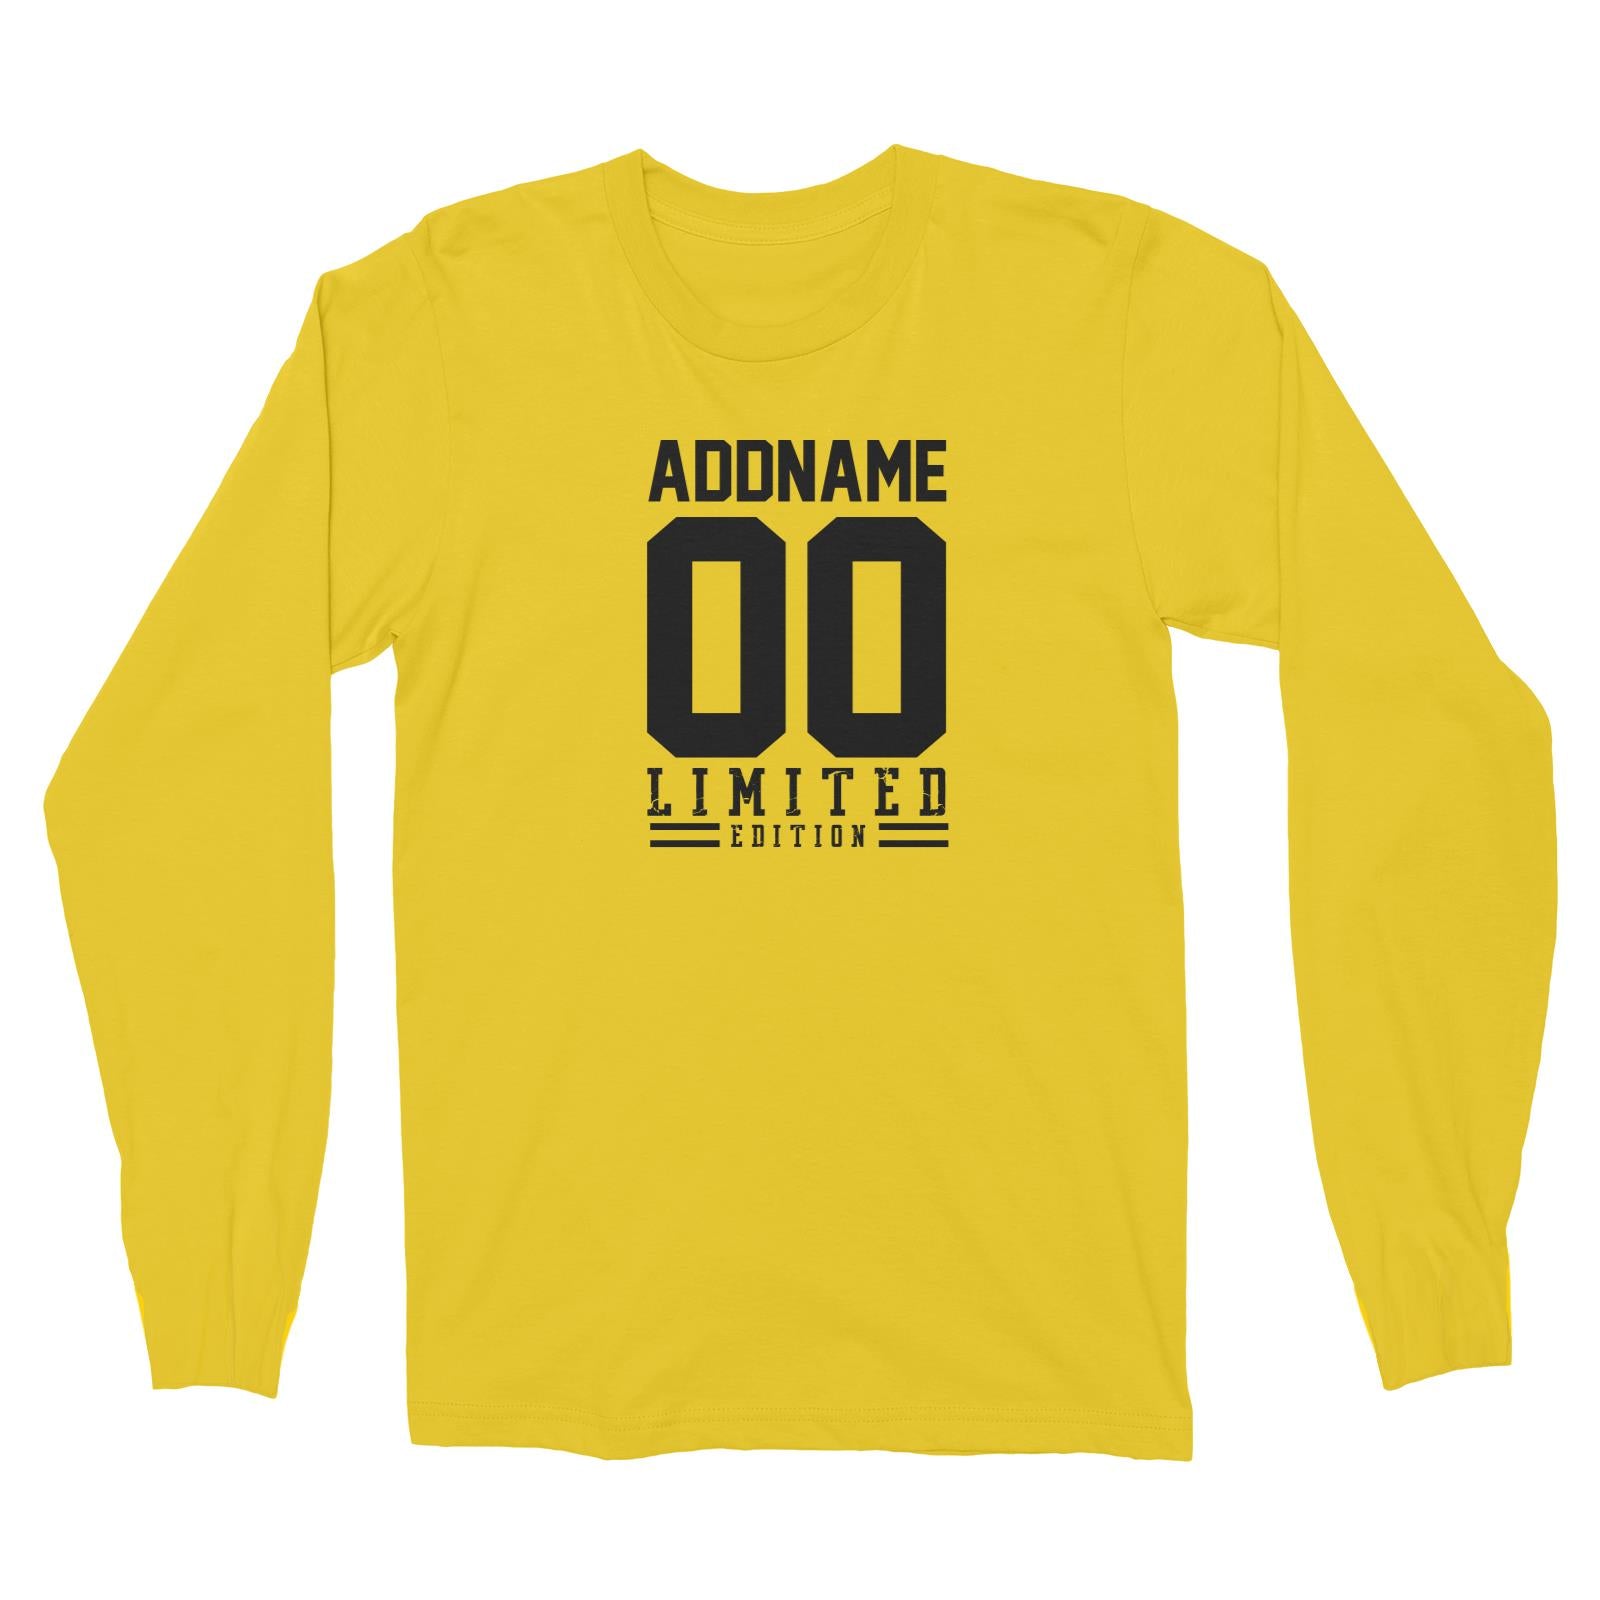 Limited Edition Jersey Personalizable with Name and Number Long Sleeve Unisex T-Shirt